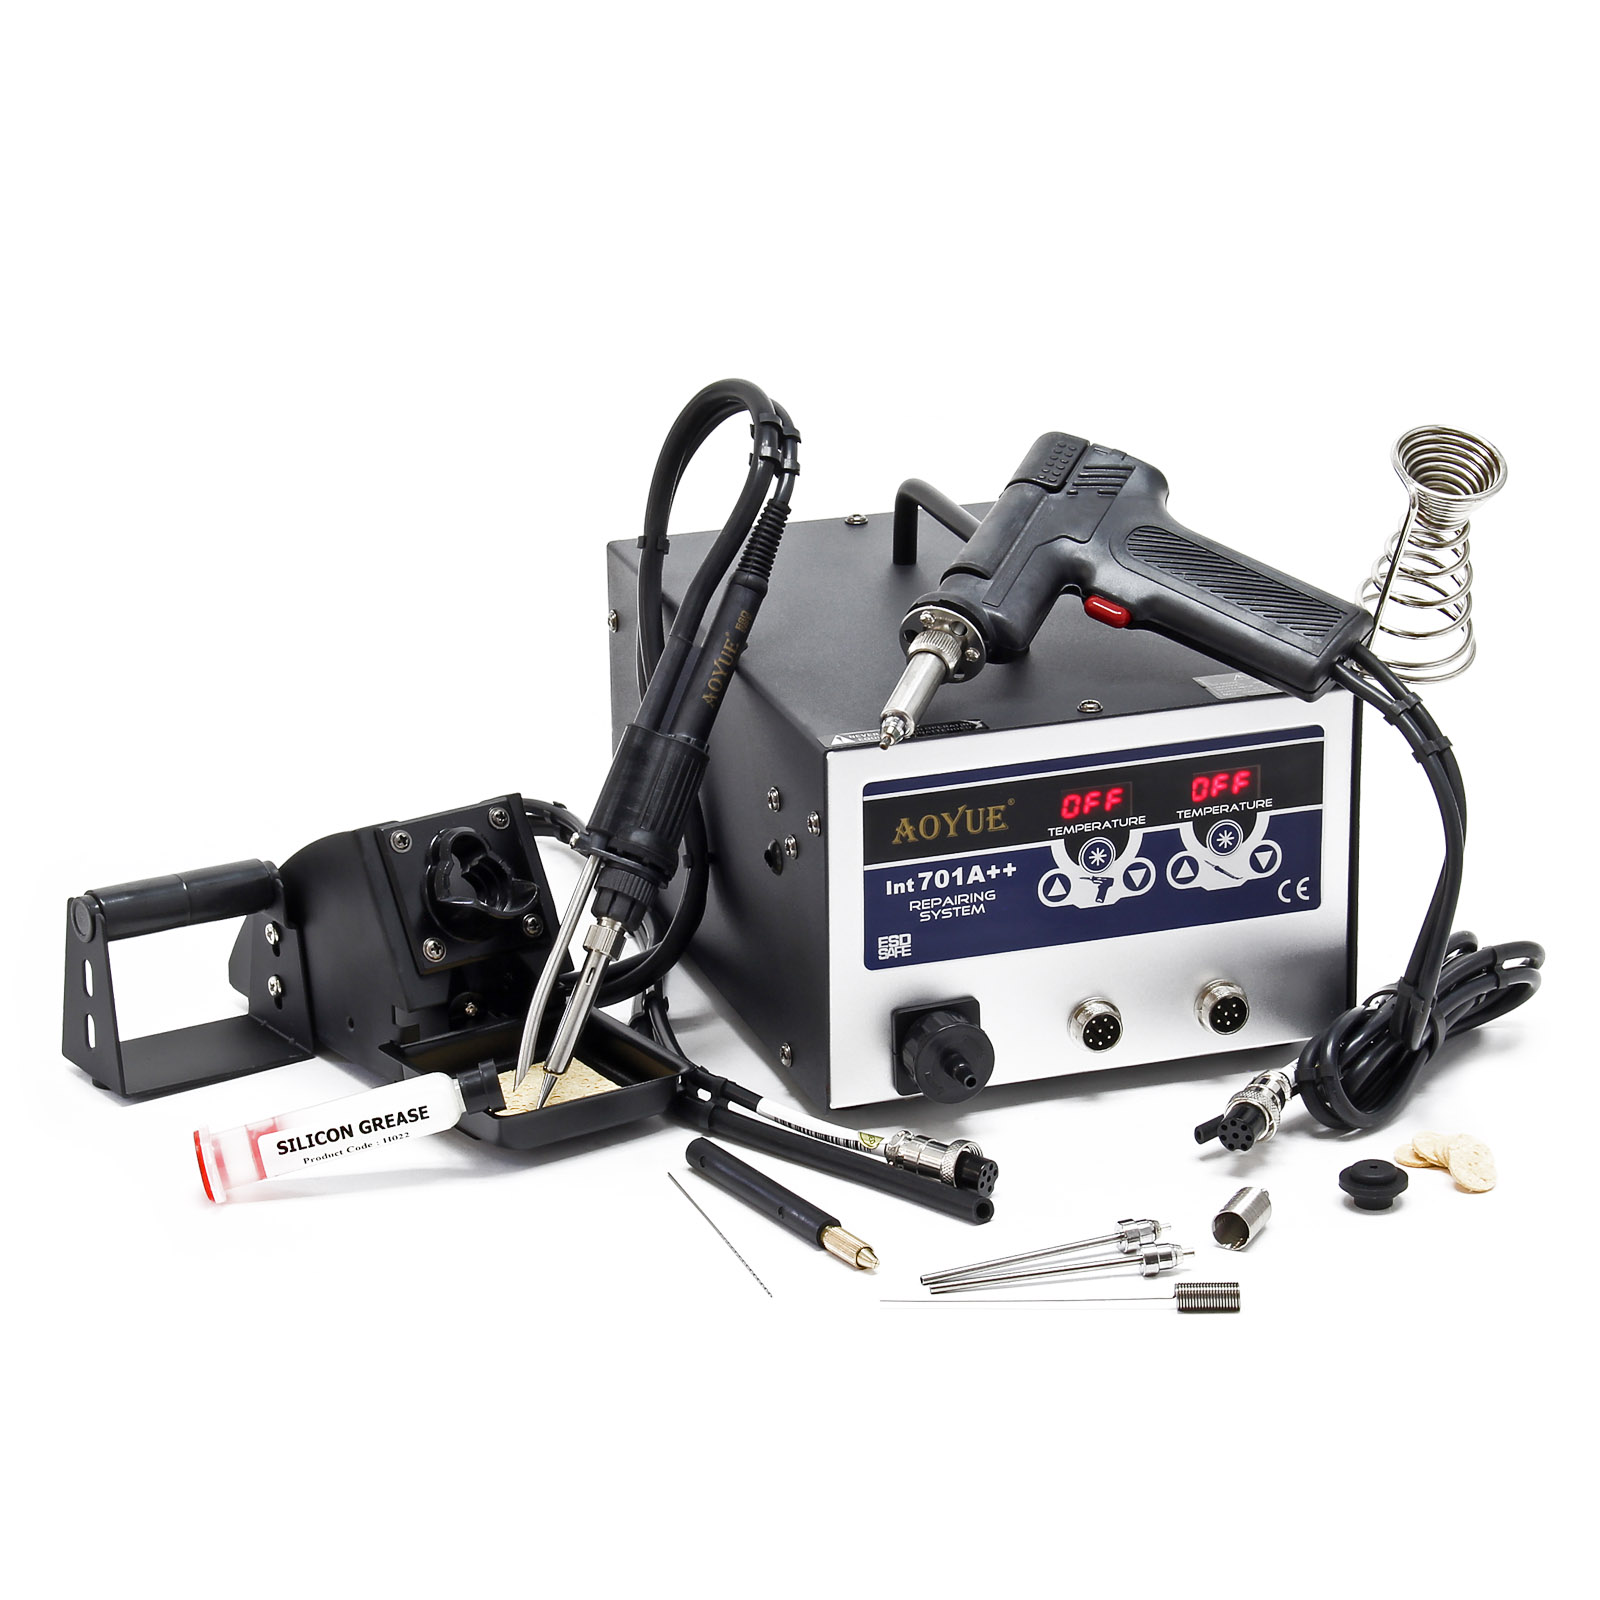 AOYUE Int701A++ Repairing-Station Desoldering Pump with Soldering Iron